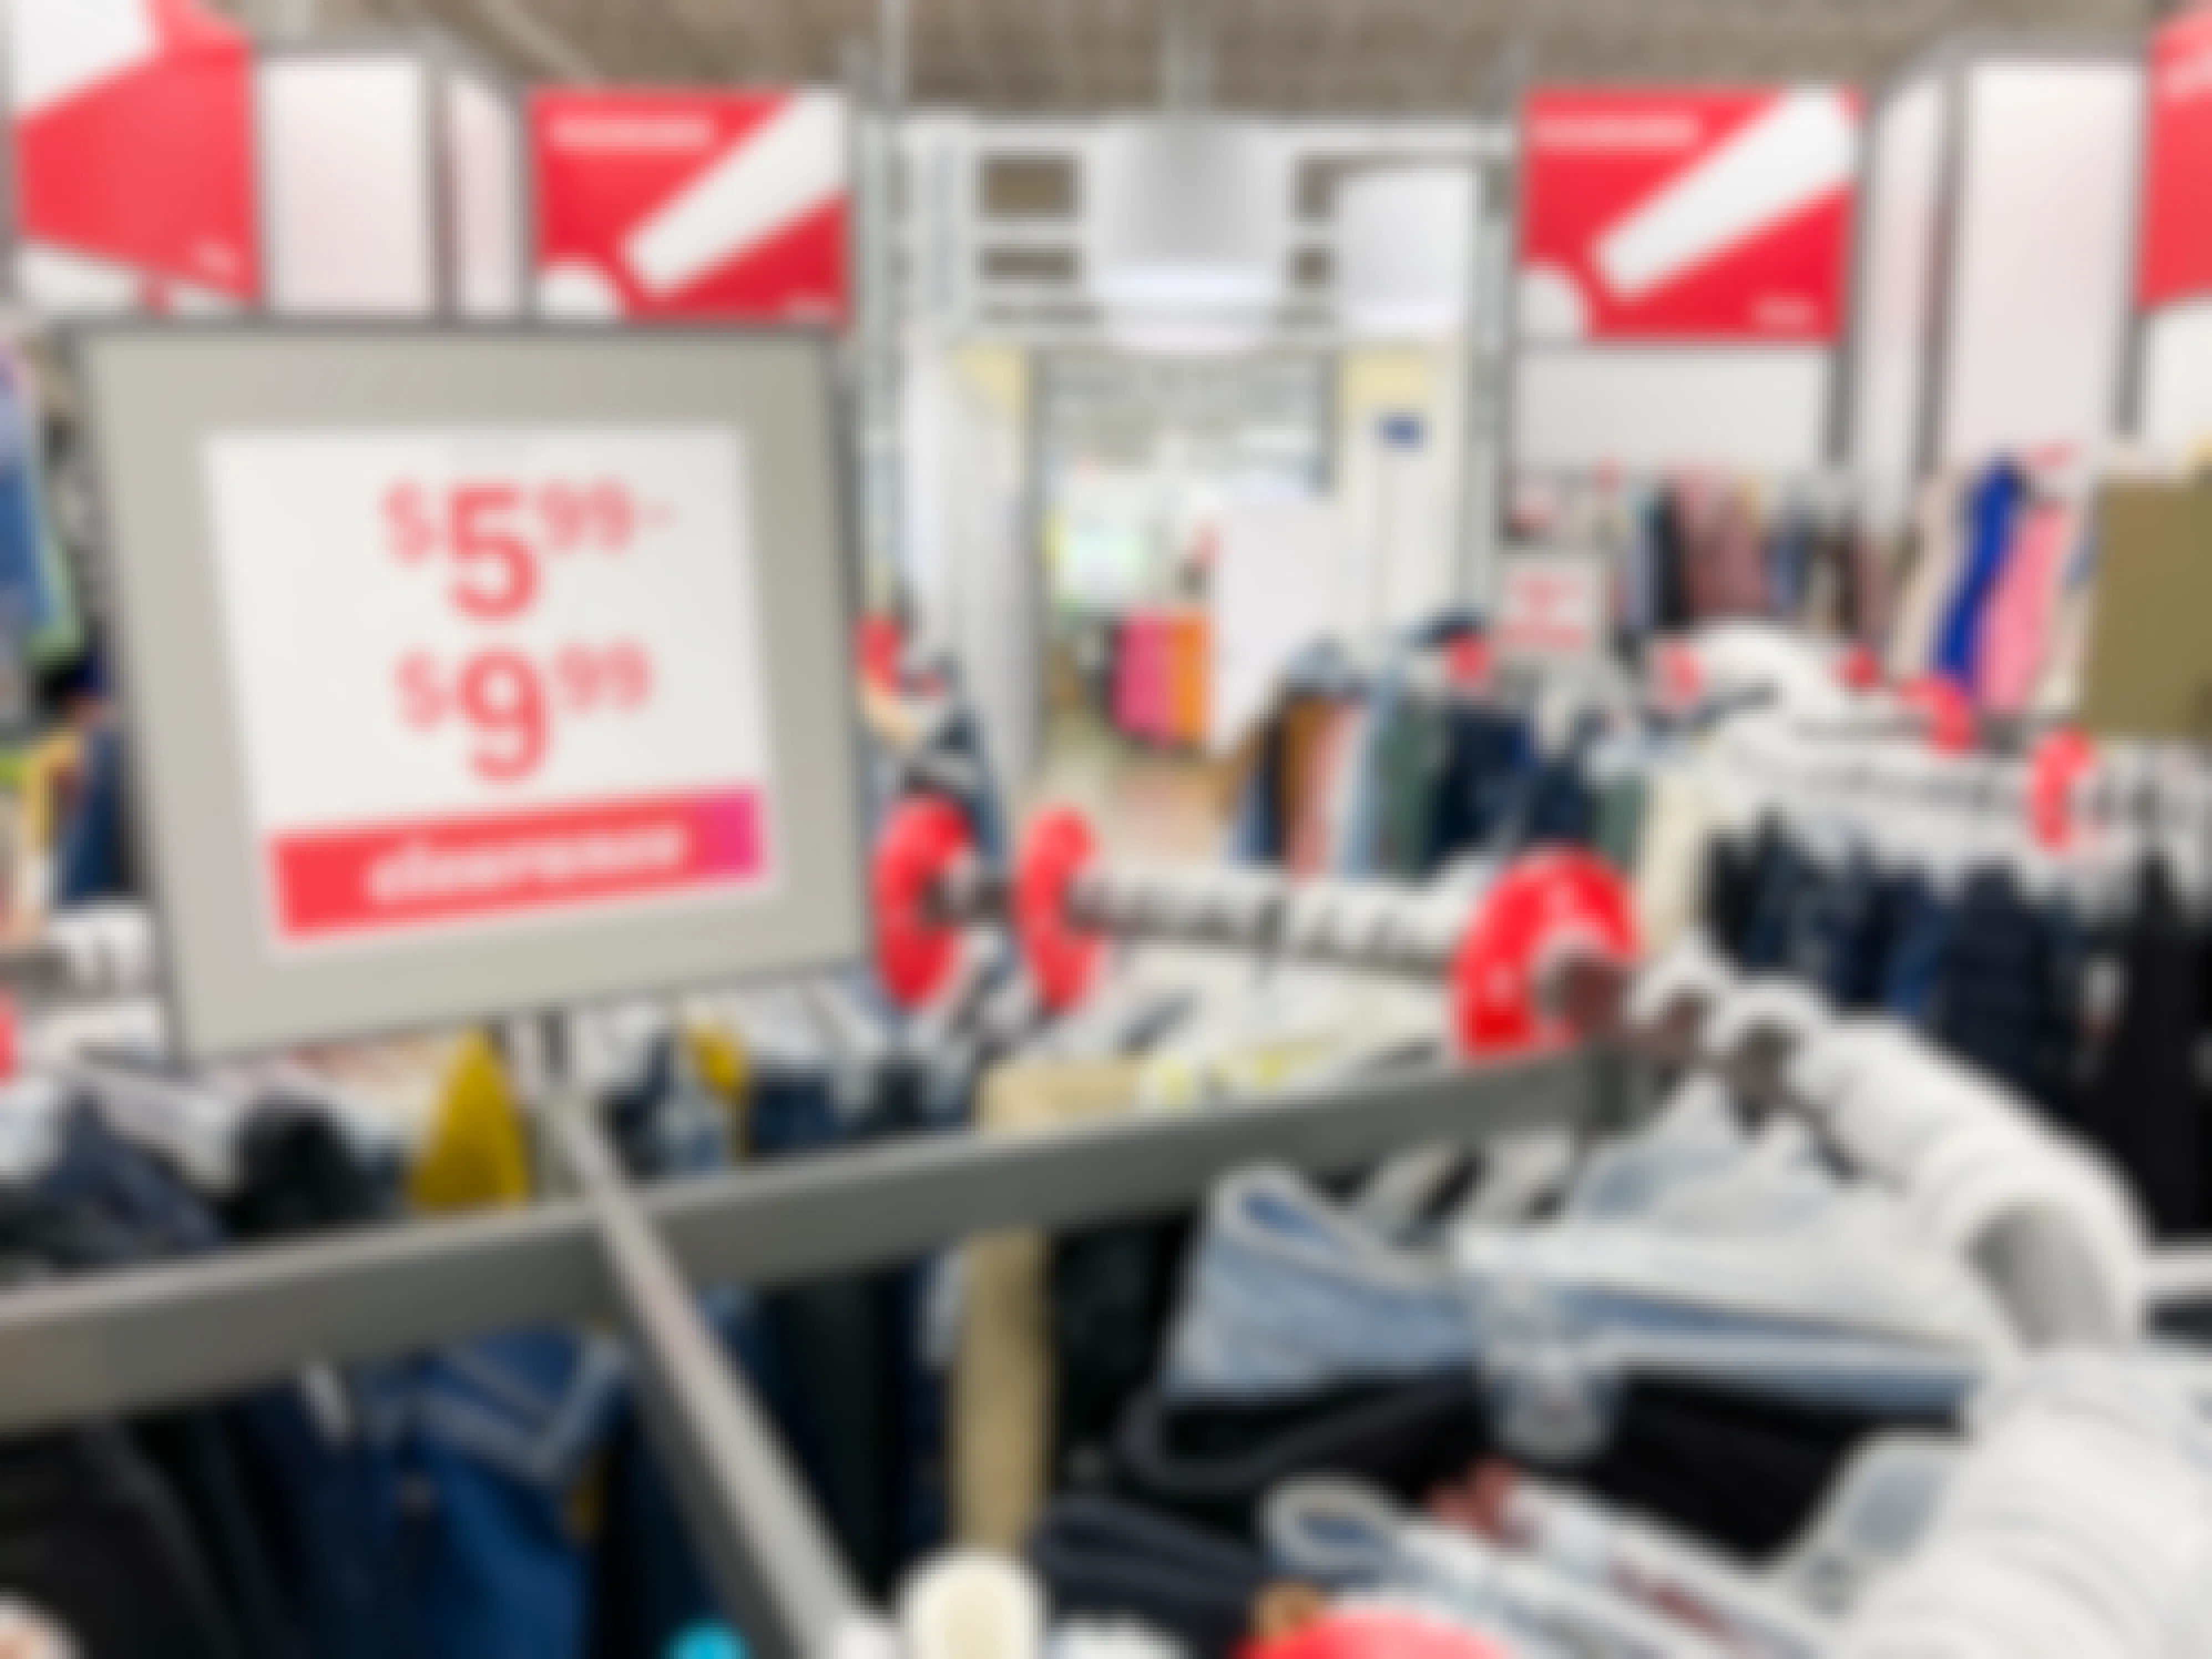 Old Navy clearance racks with sales signs indicating price points of $5.99 to $9.99.